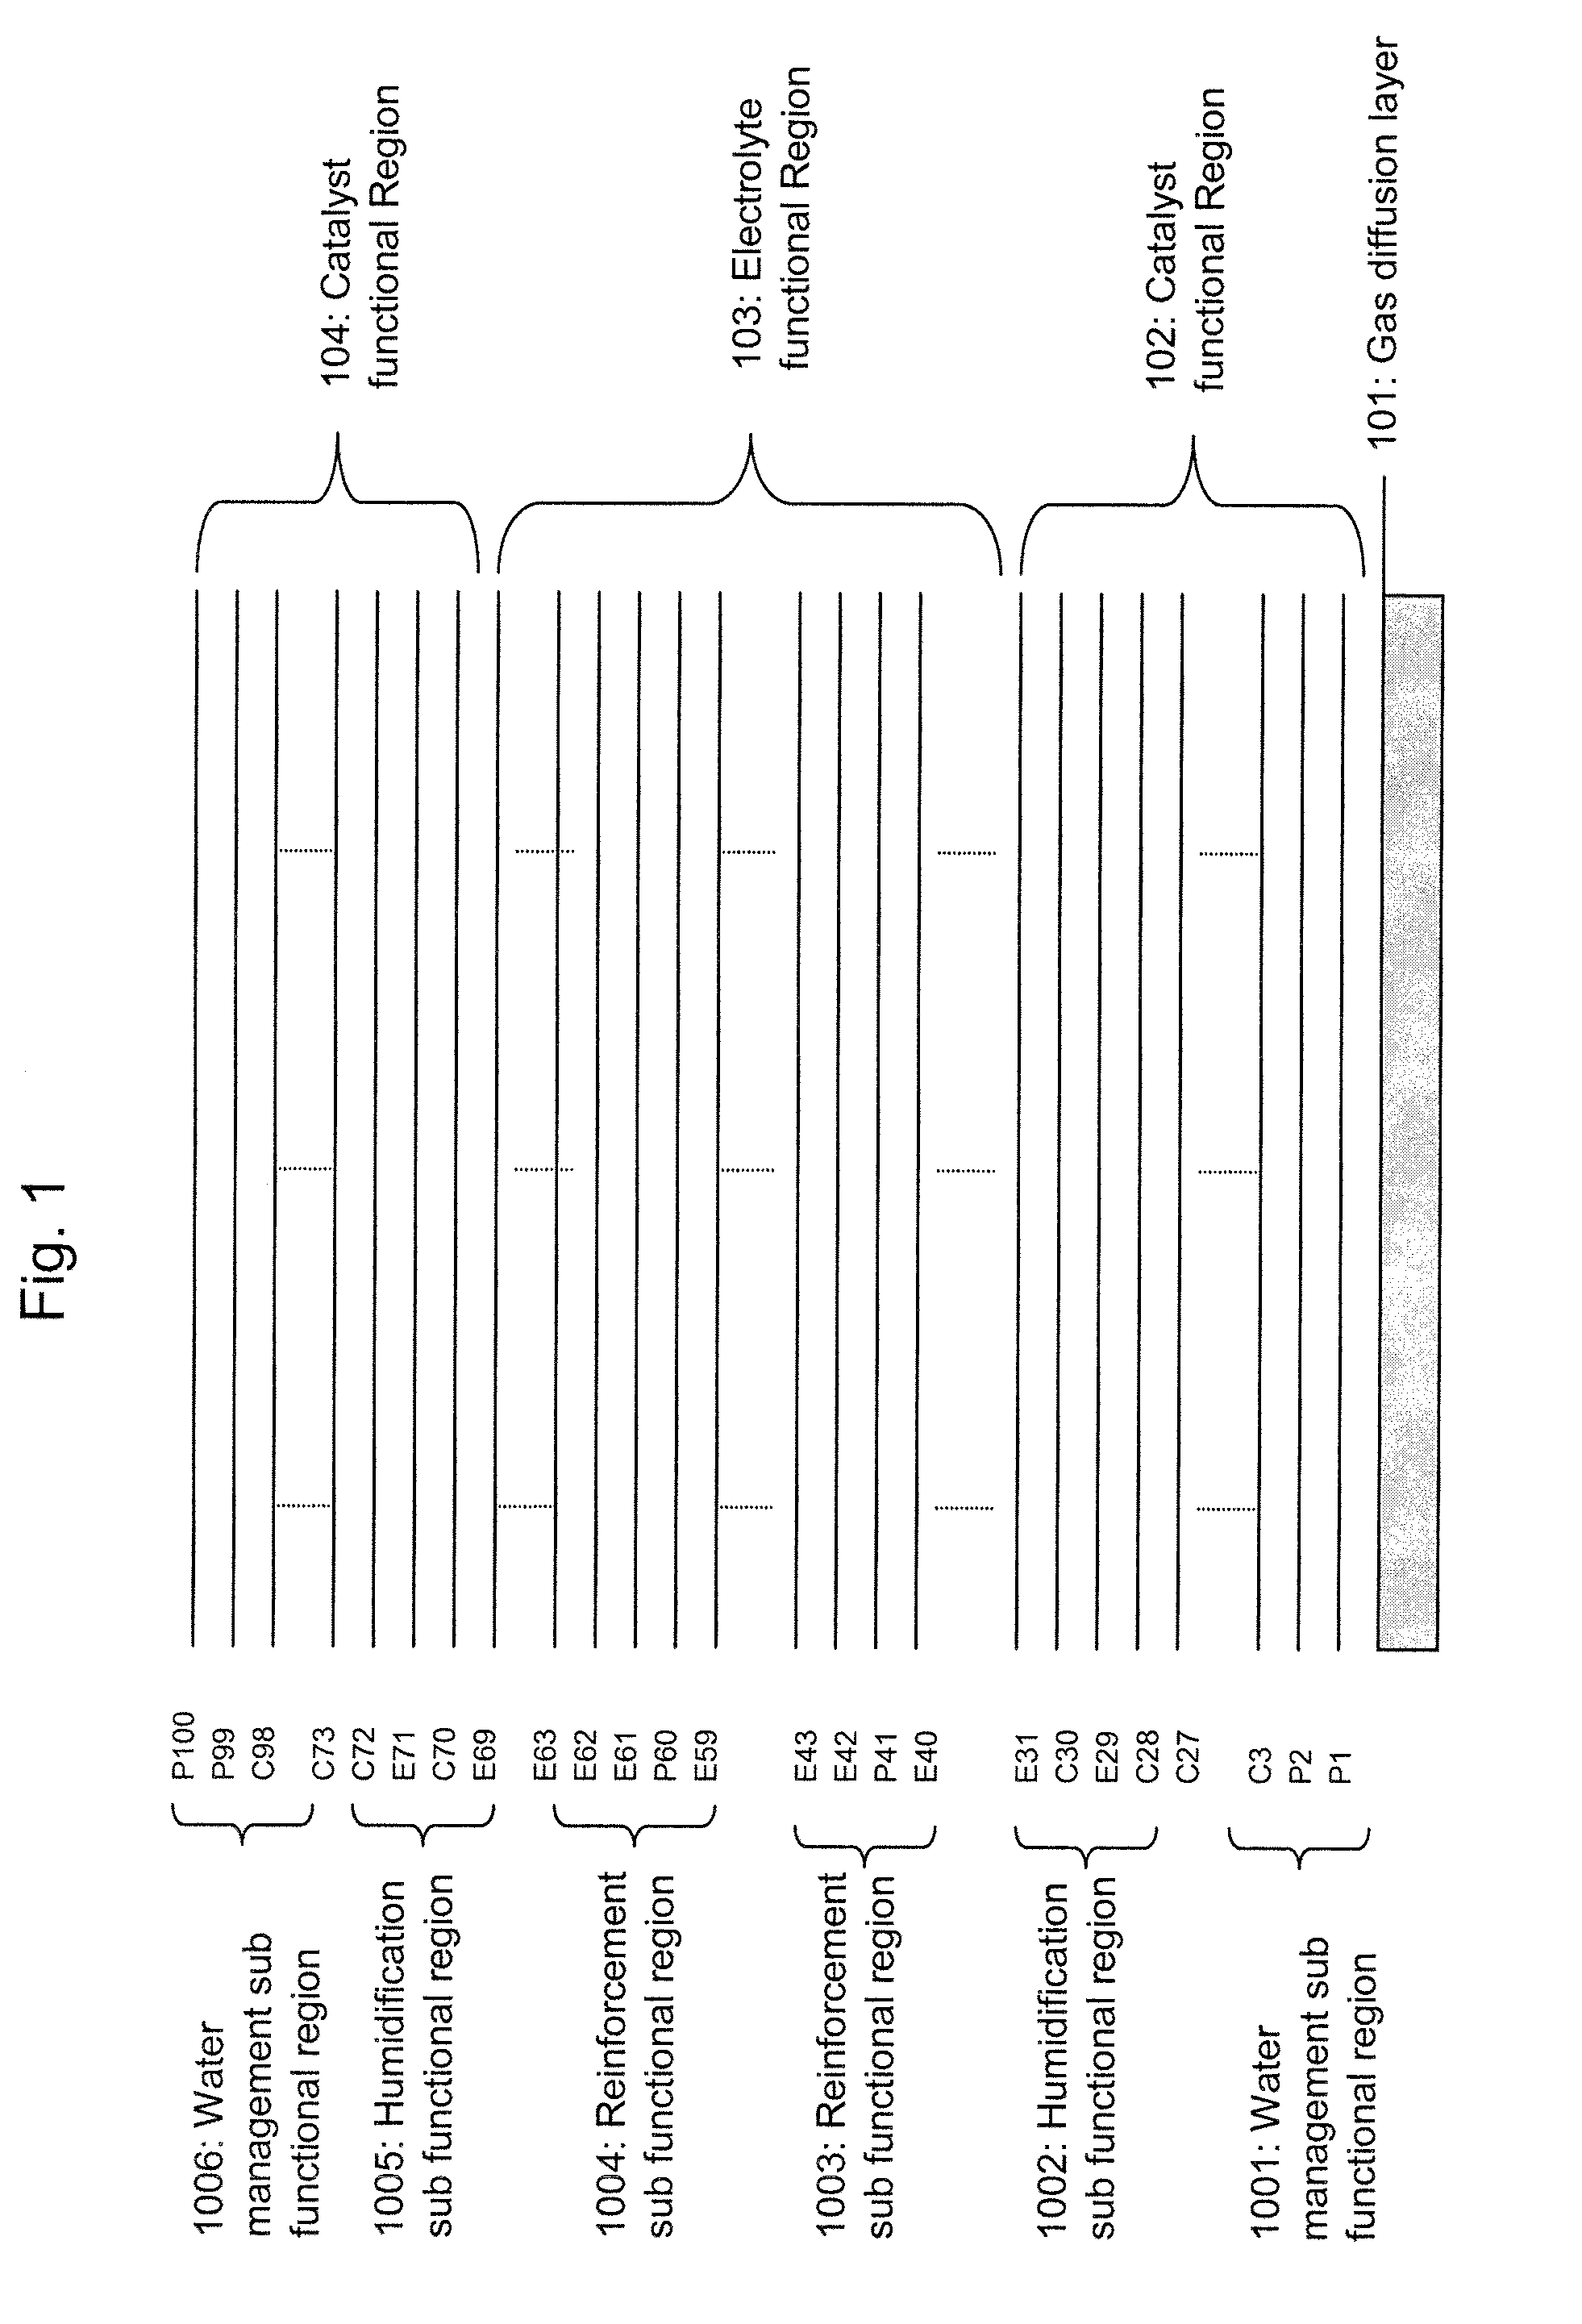 Novel membrane electrode assembly and its manufacturing process